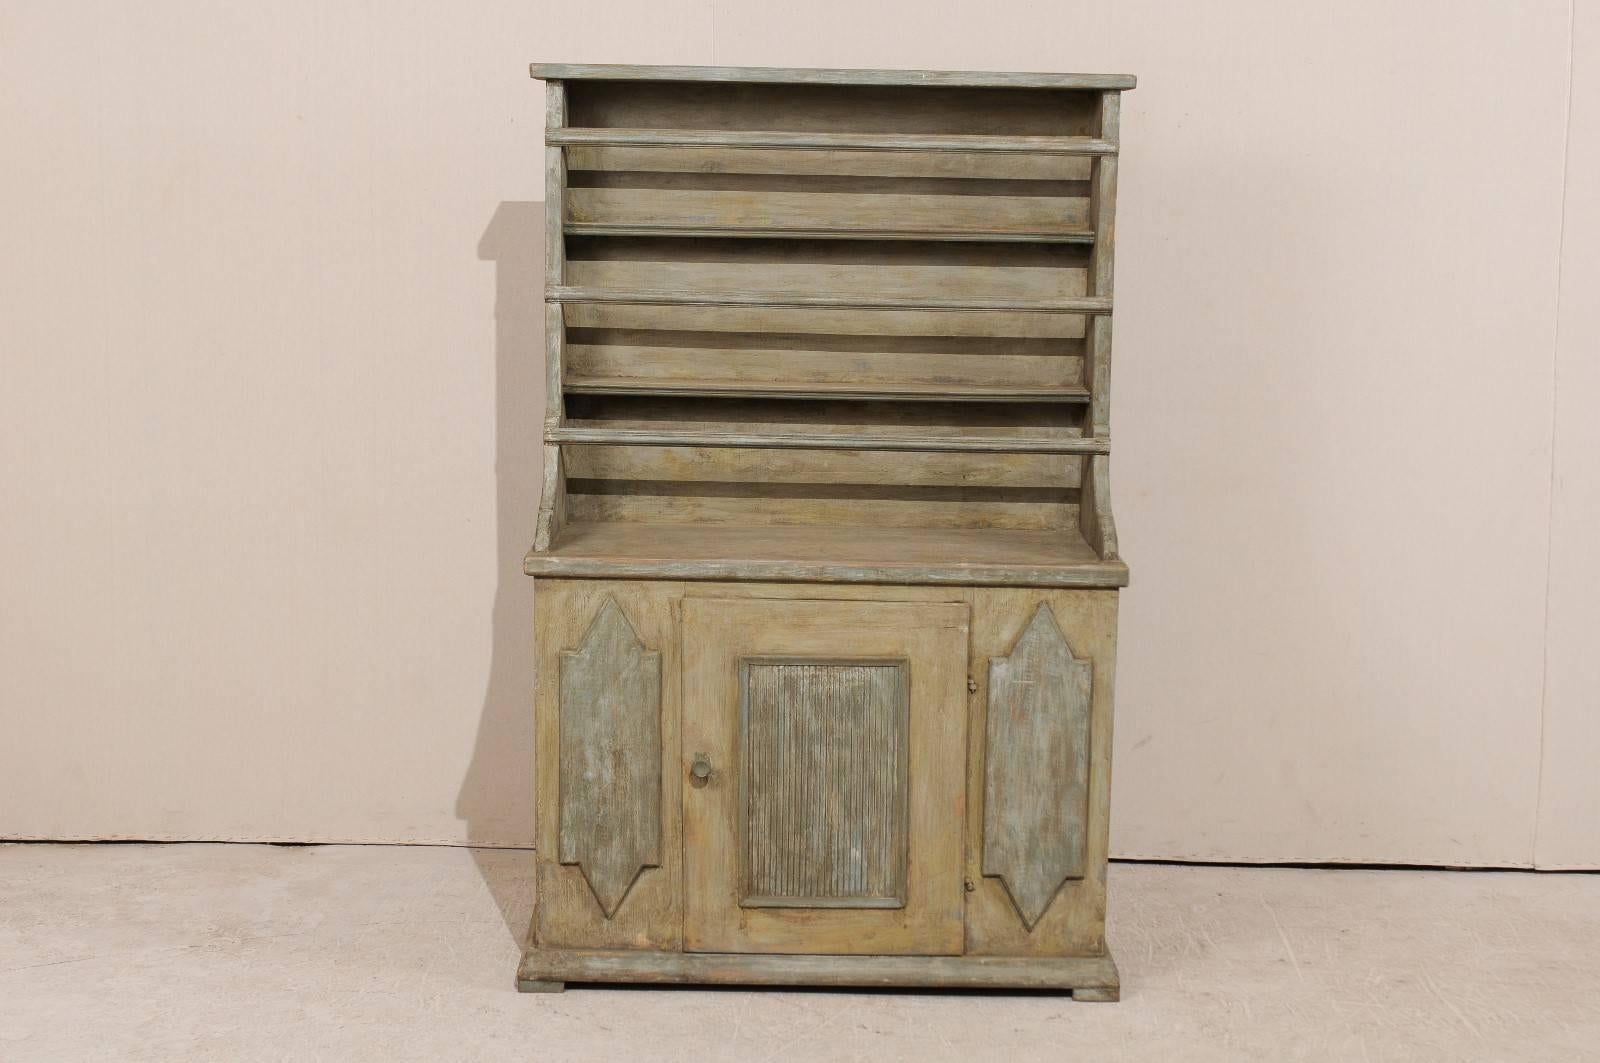 An early 19th century, Swedish painted wood cabinet with plate rack. This period Gustavian Swedish cabinet from the early 19th century features a plate rack top over cabinet bottom with one centered door. The cabinet is accented with a square shaped